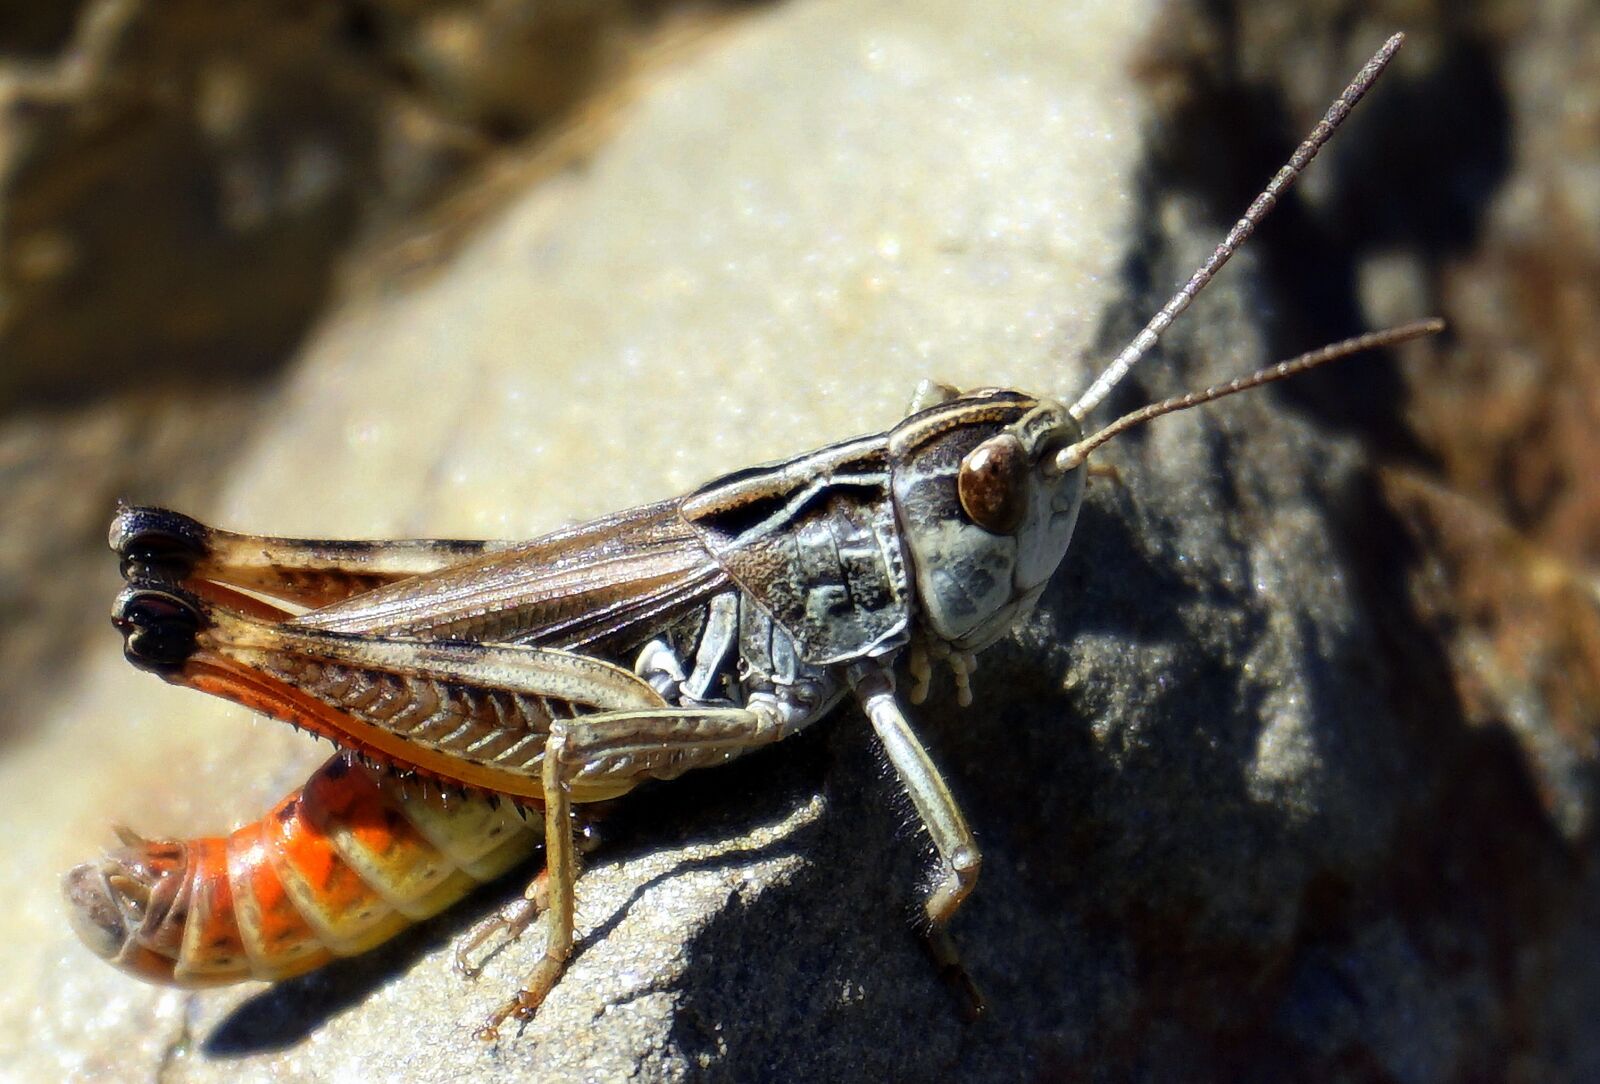 Sony a6000 sample photo. Grasshopper, animal, insect photography